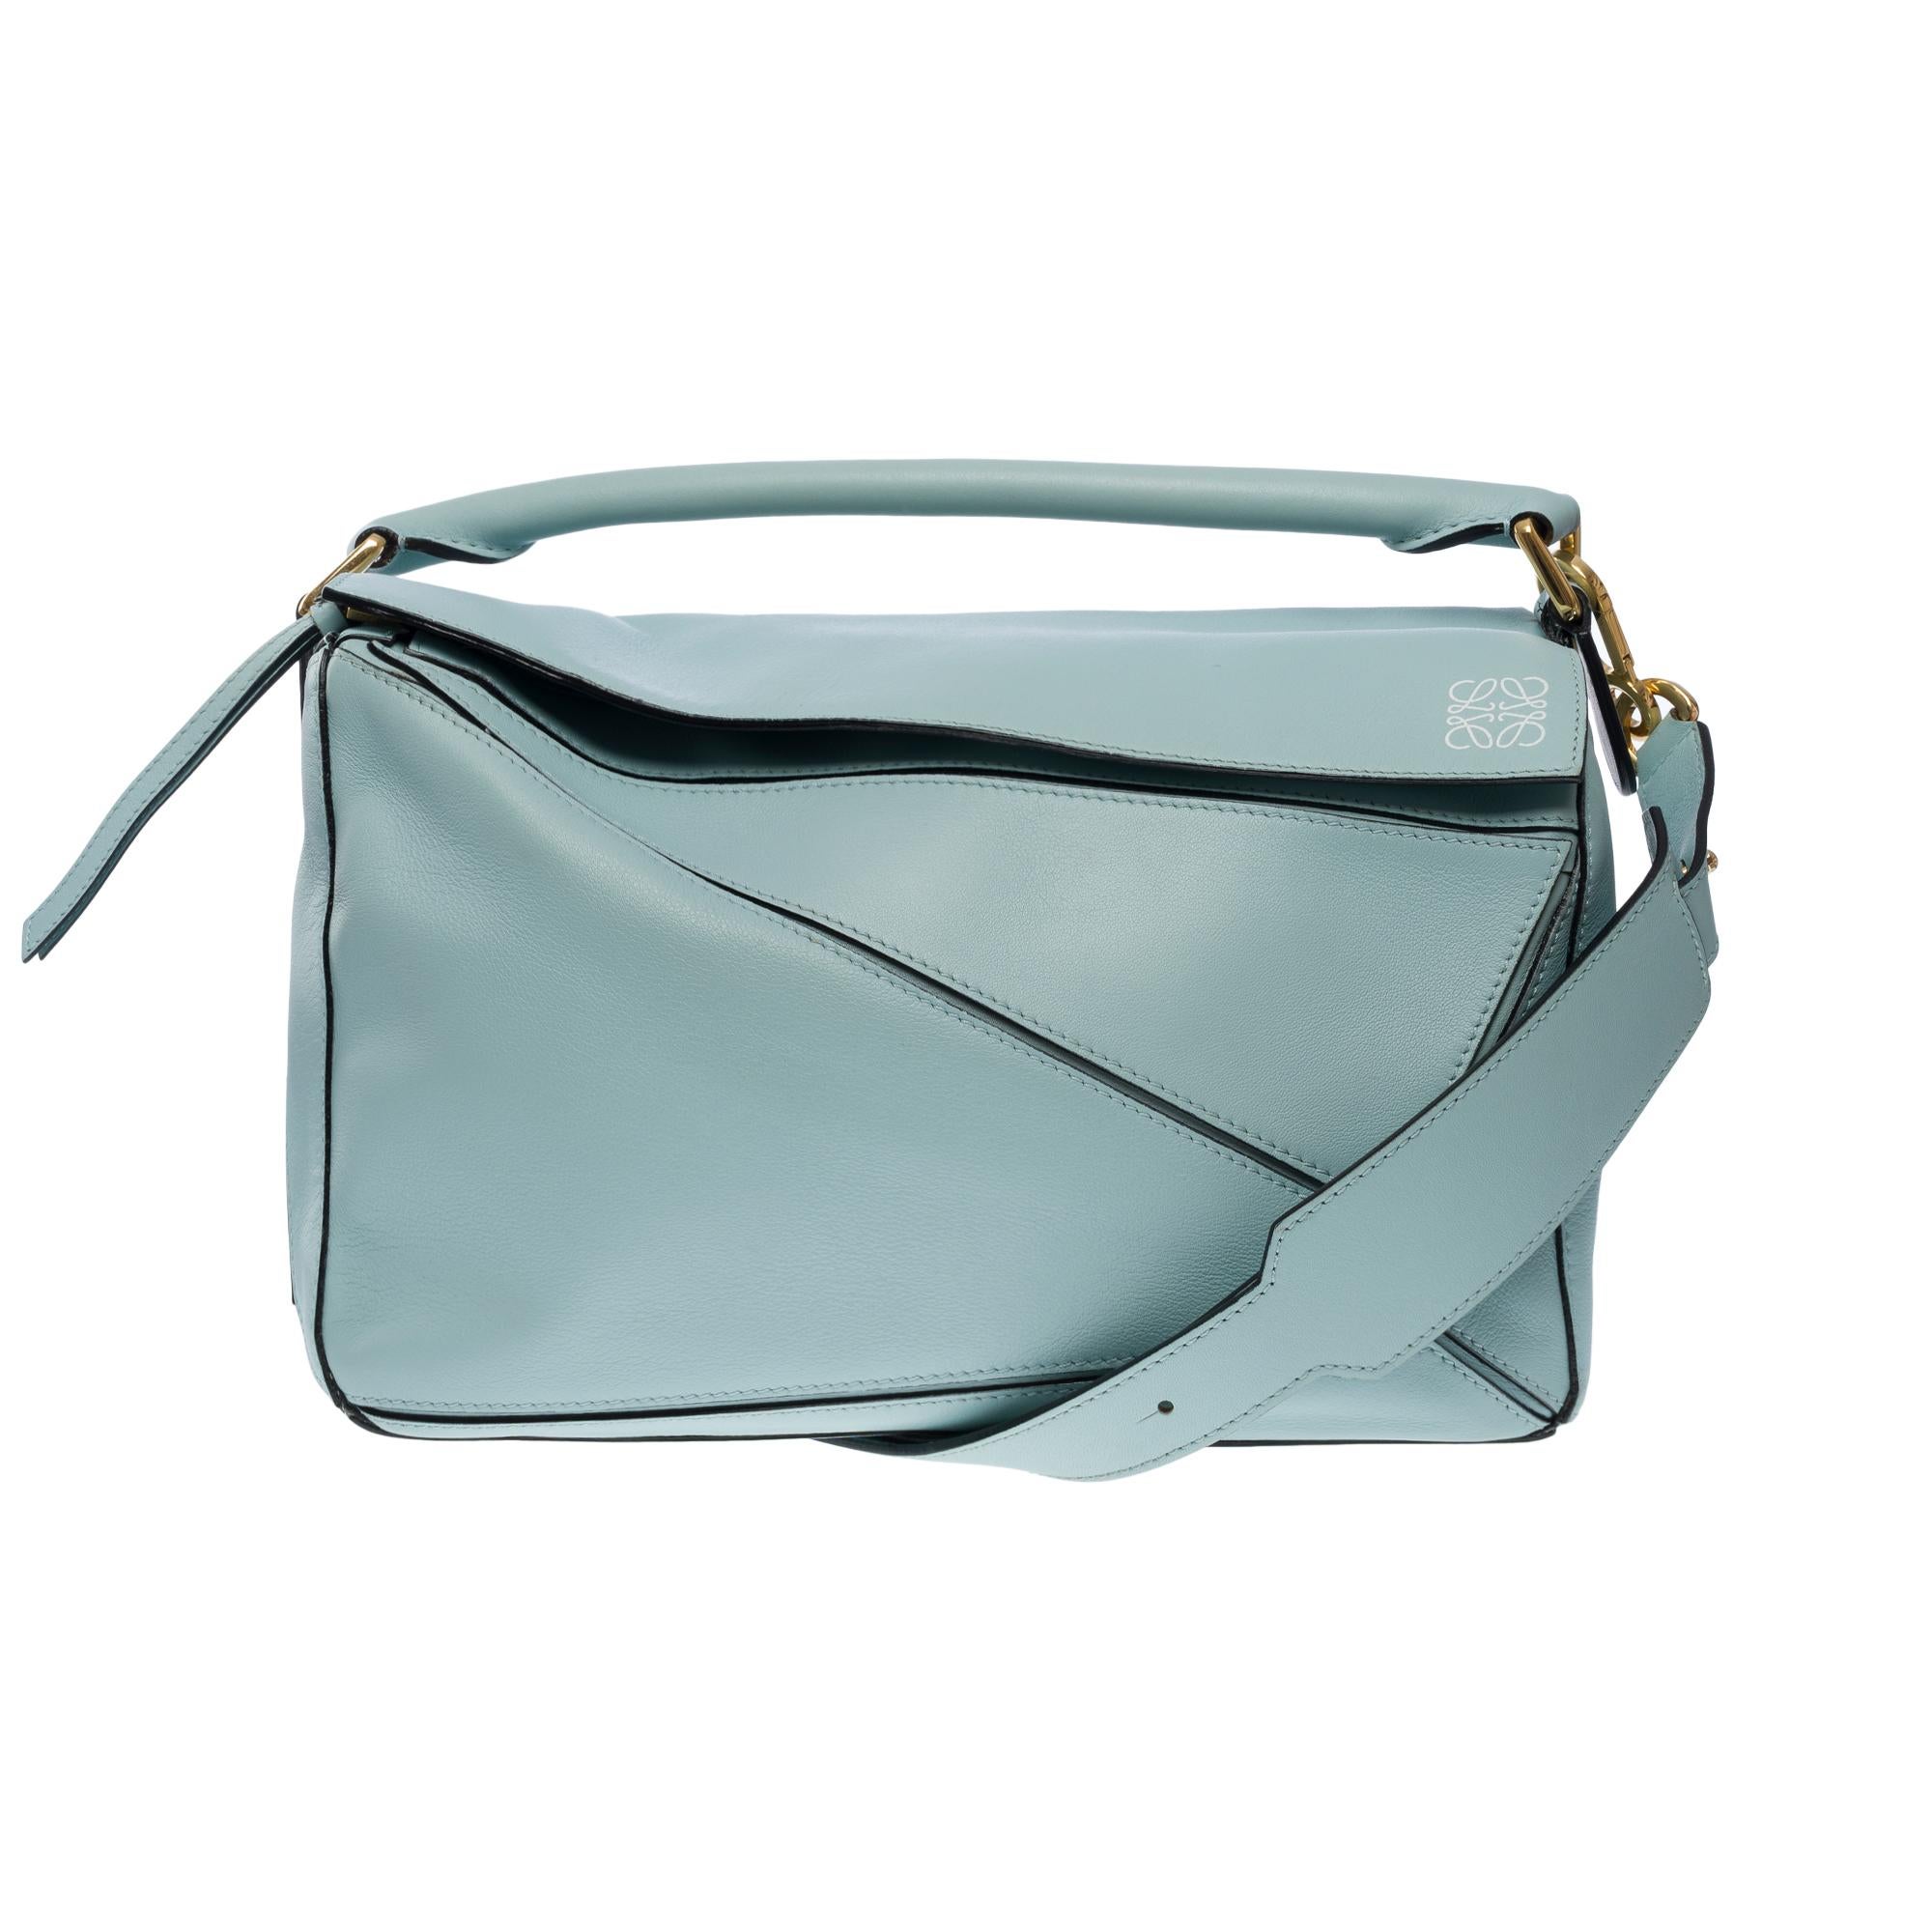 Very​ ​Chic​ ​Loewe​ ​Puzzle​ ​Medium​ ​handbag​ ​in​ ​denim​ ​blue​ ​leather​ ​designed​ ​by​ ​the​ ​artistic​ ​director​ ​of​ ​the​ ​brand​ ​Jonathan​ ​Anderson
Gold-tone​ ​metal​ ​hardware,​ ​simple​ ​blue​ ​leather​ ​handle,​ ​blue​ ​leather​